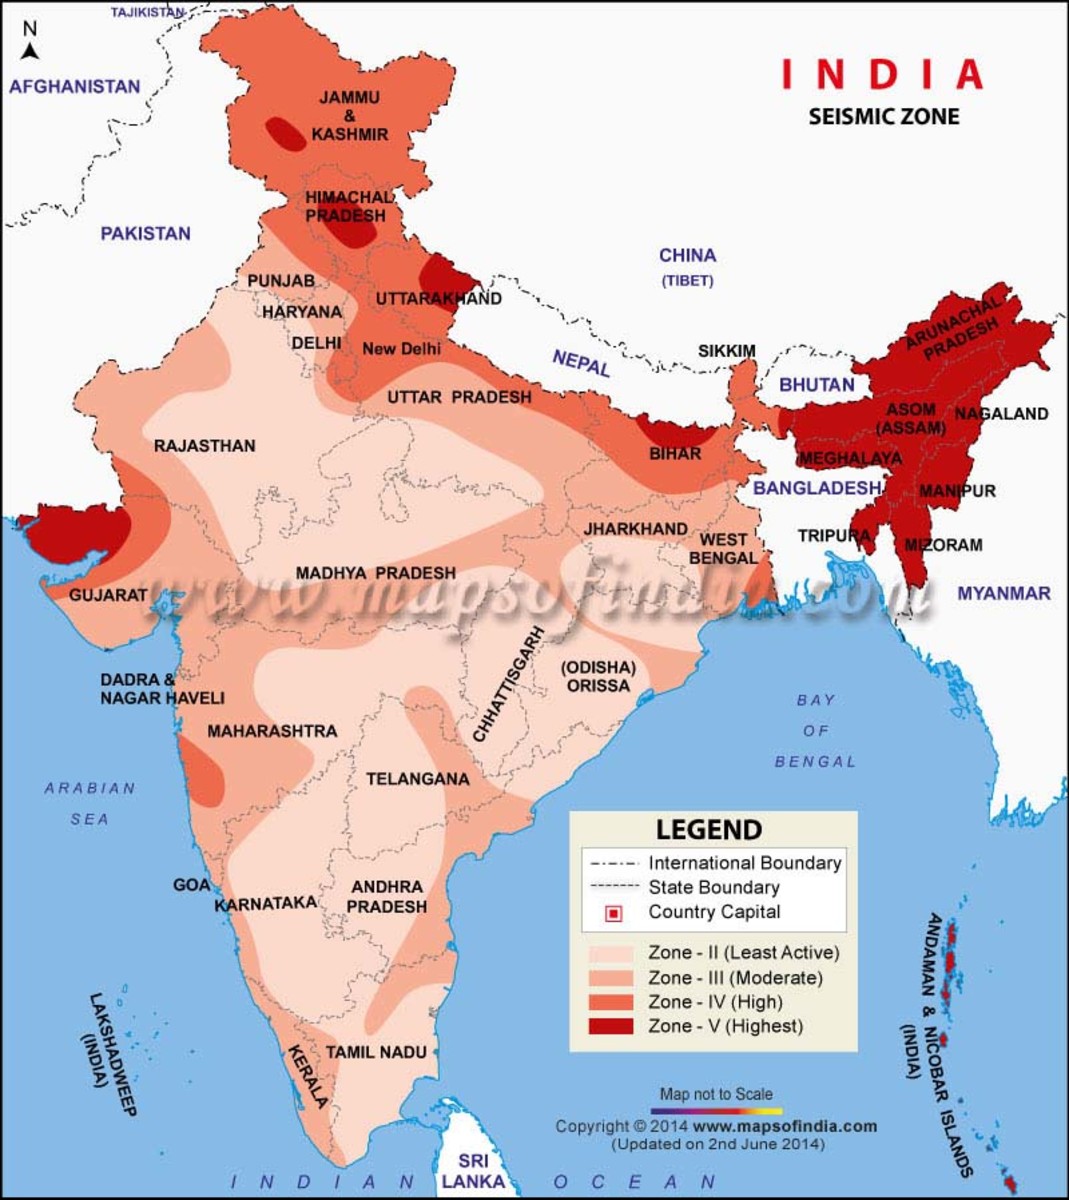 Map showing different earthquake zones in India